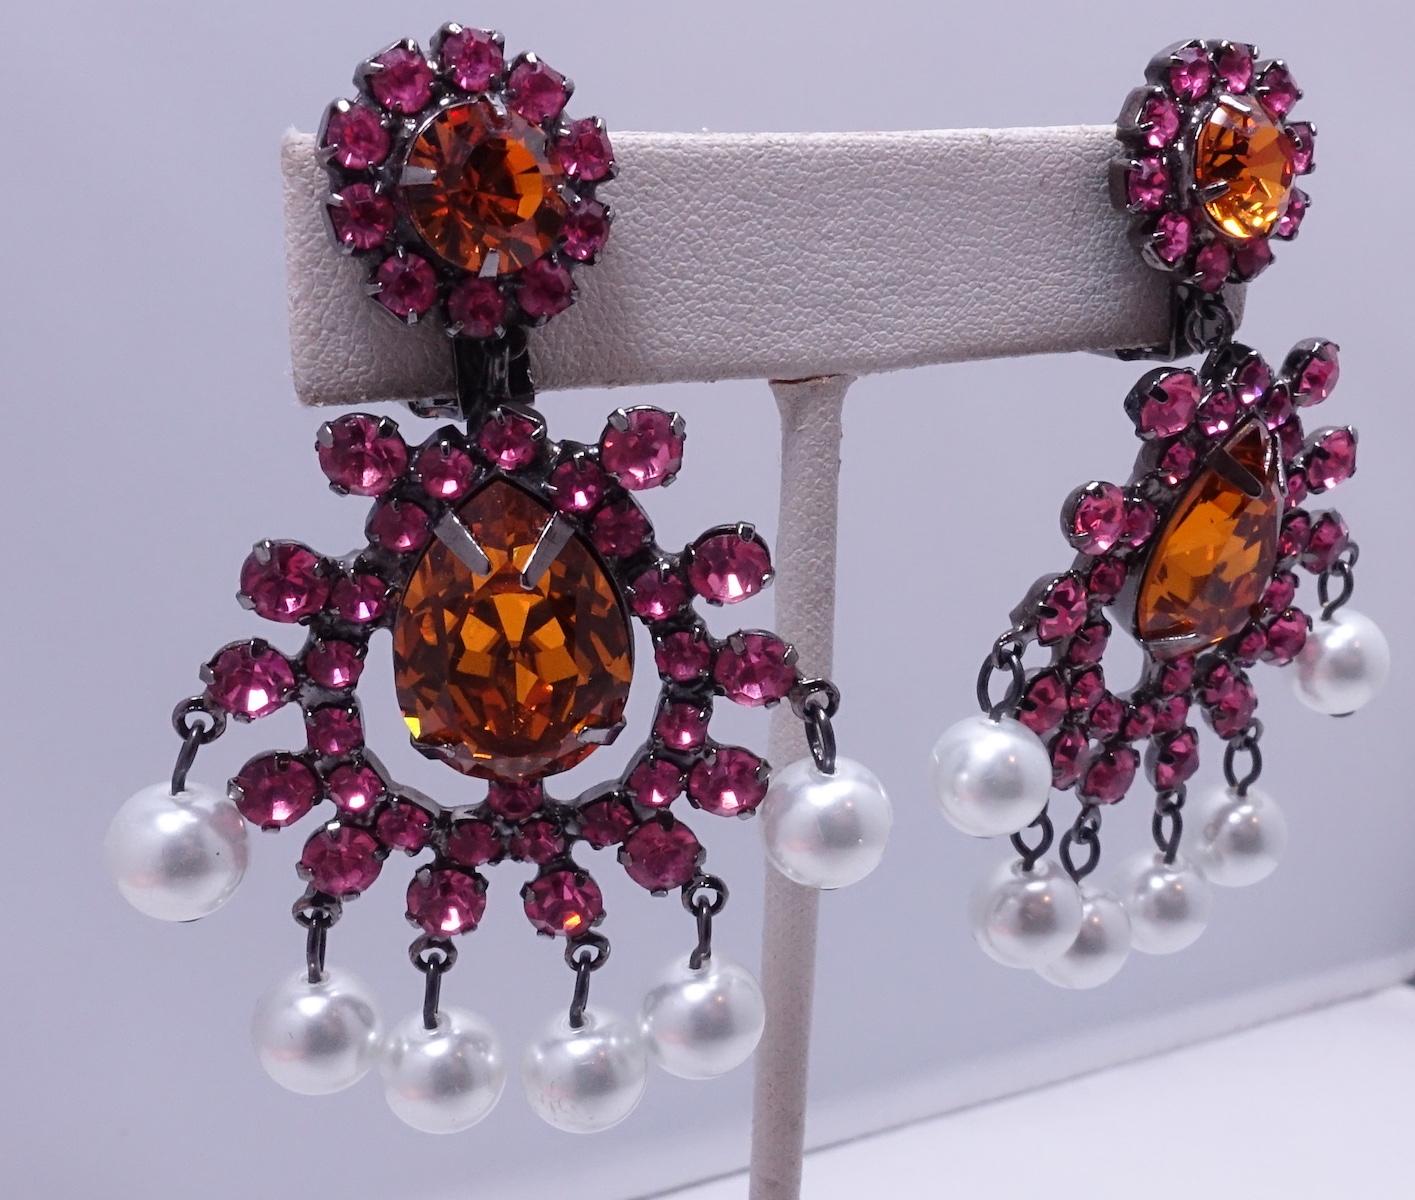 These signed Kenneth Lane earrings feature faux pearls with pink & citrine crystal accents in a japanned silvertone setting.  In excellent condition, these clip earrings measure 2-1/2” x 1-3/4” and are signed “Kenneth Lane”.